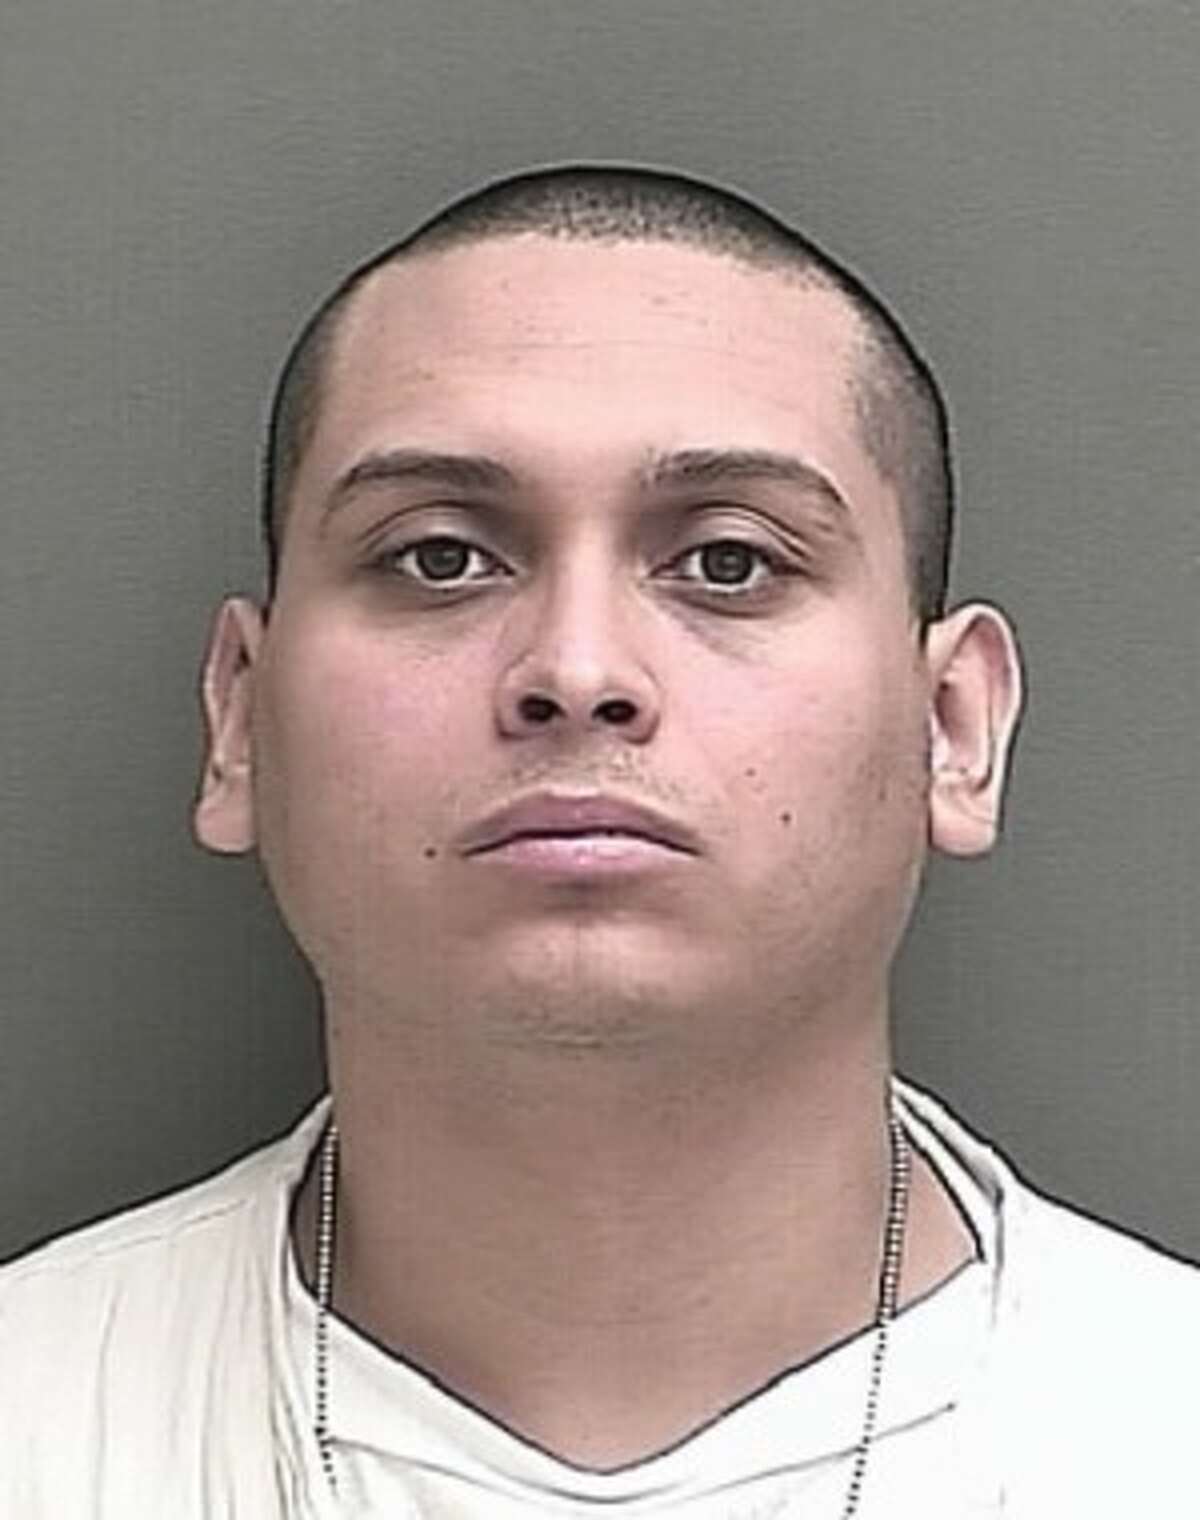 Surenos Trece gang member wanted by Texas police for failing to register as a sex offender image